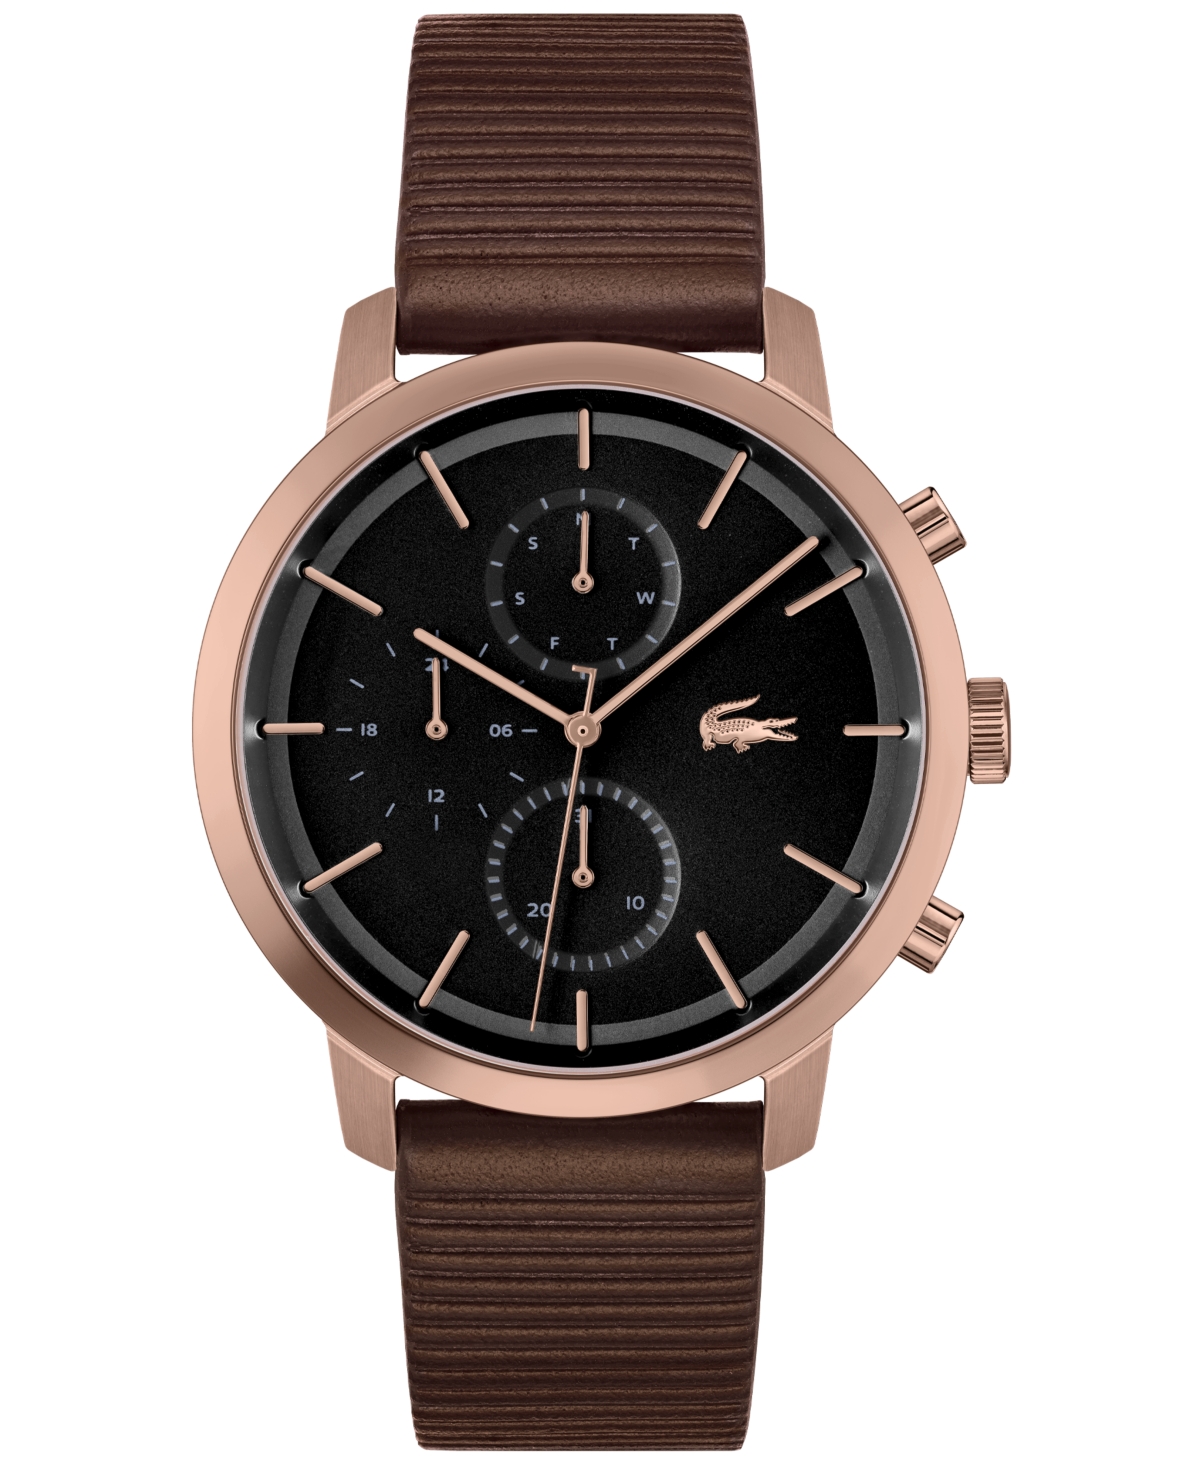 LACOSTE MEN'S REPLAY BROWN LEATHER STRAP WATCH 44 MM